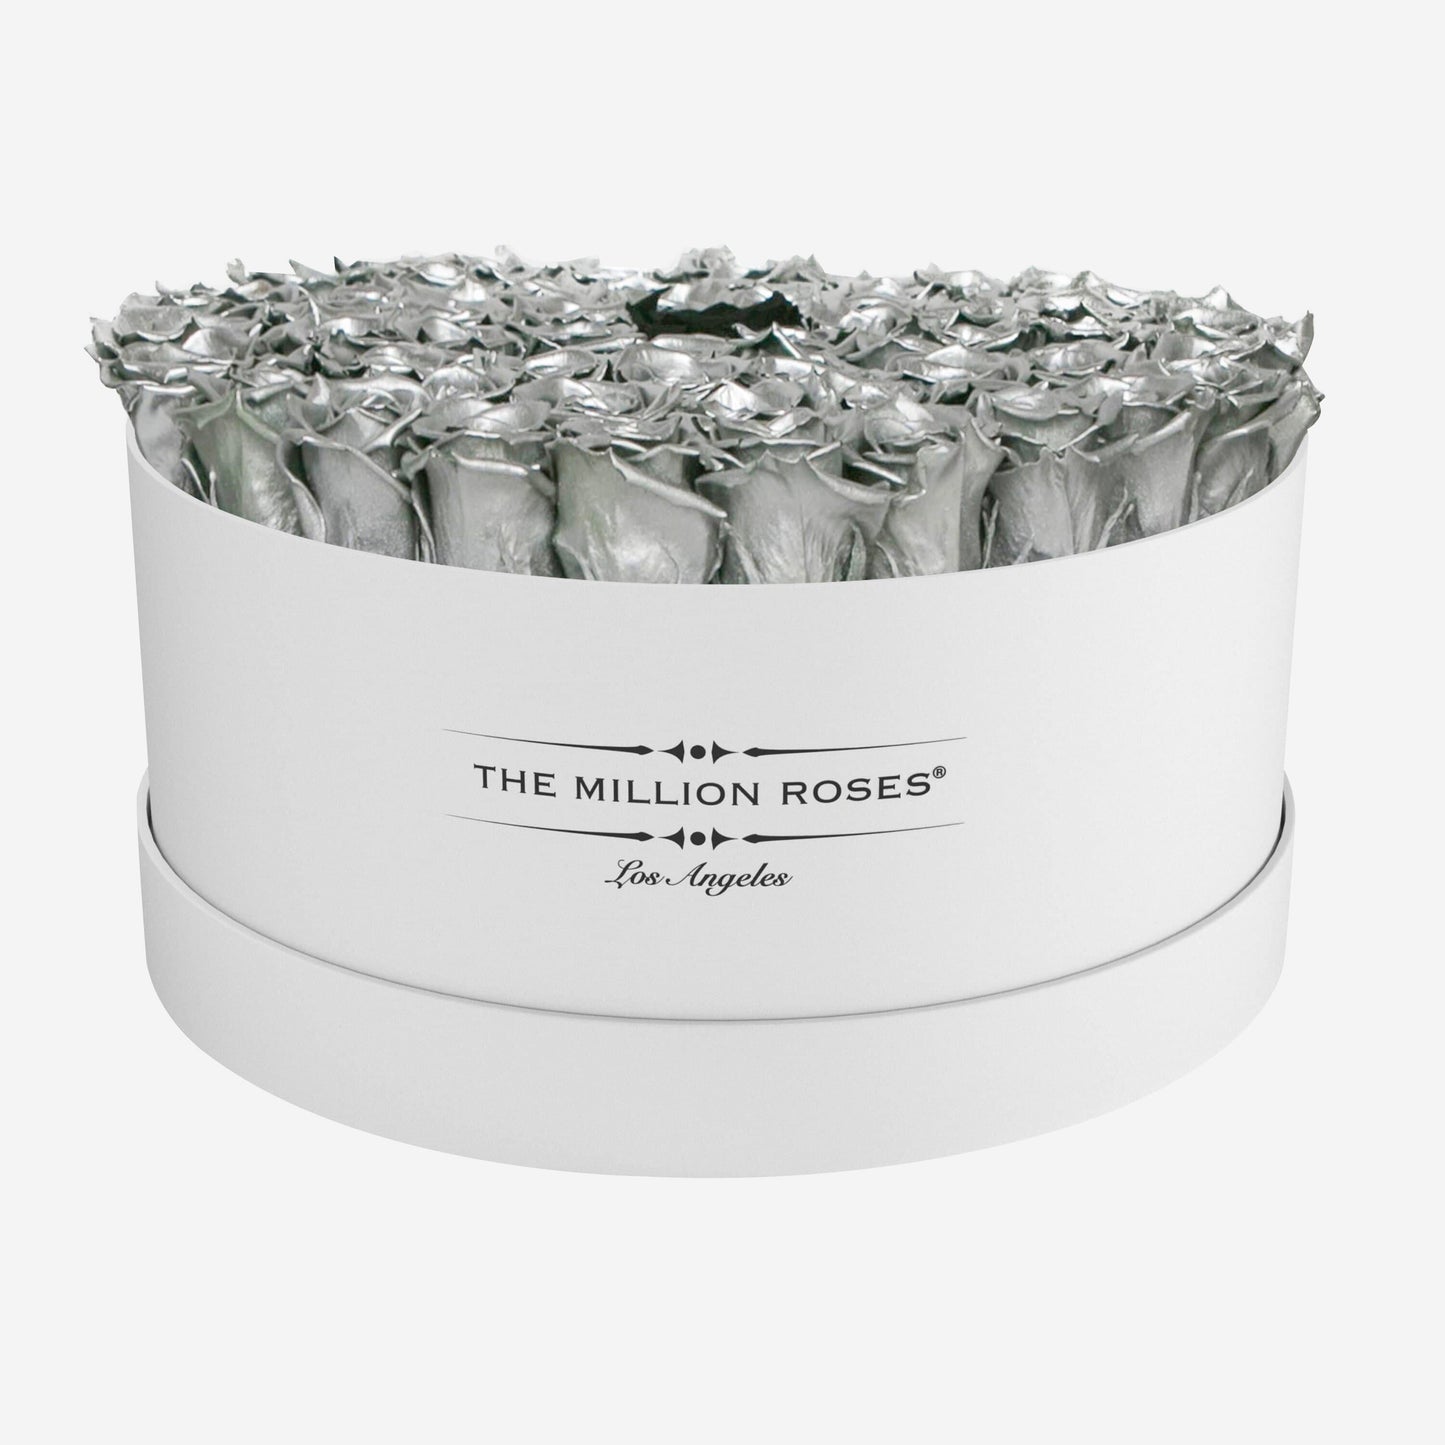 Deluxe White Box | Silver Roses - The Million Roses